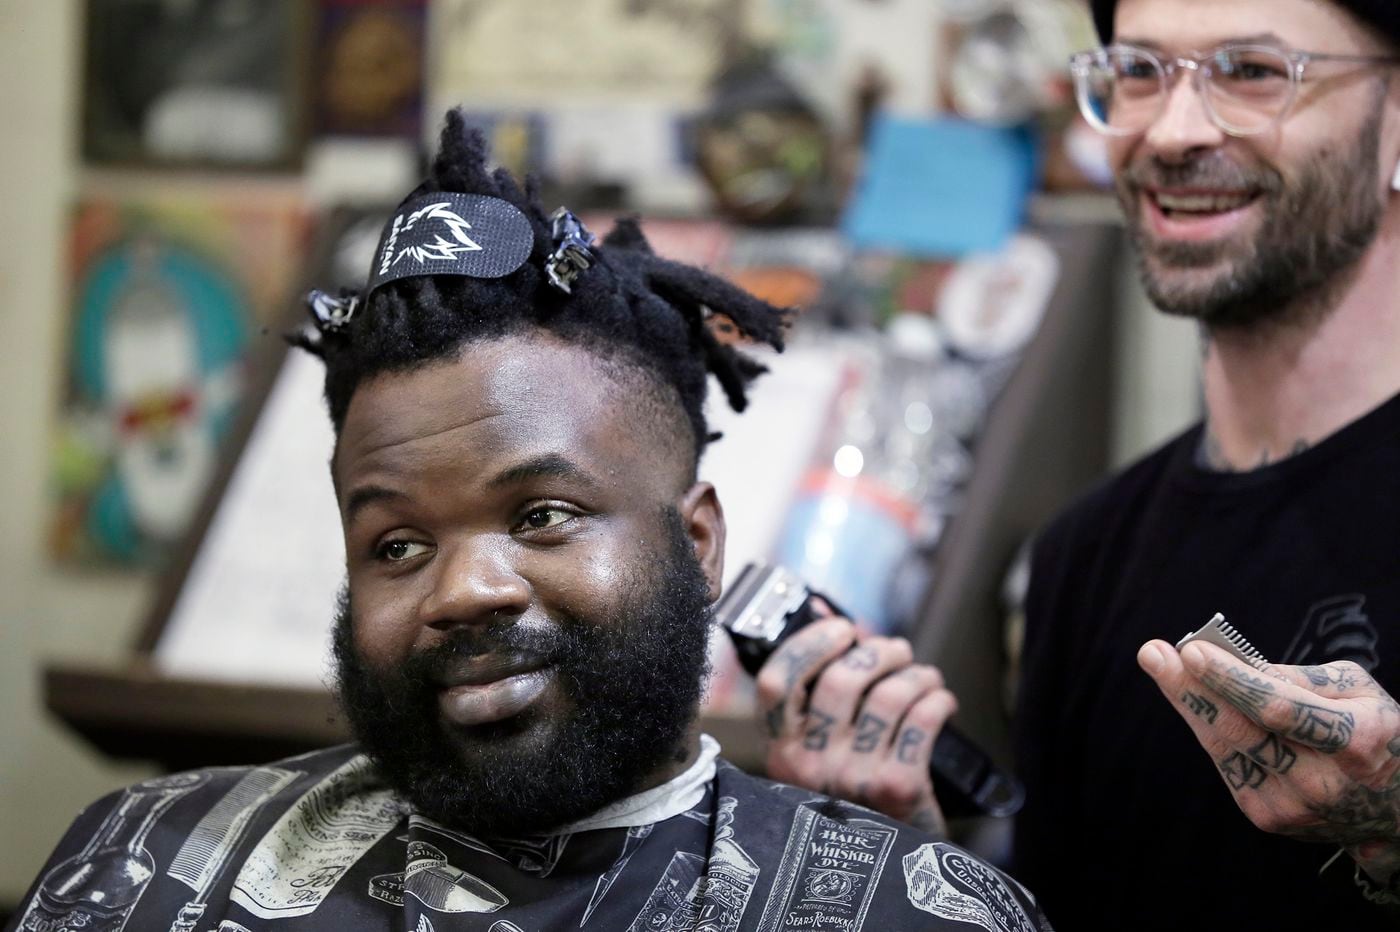 How To Get The Best Haircut According To Philly Barbers